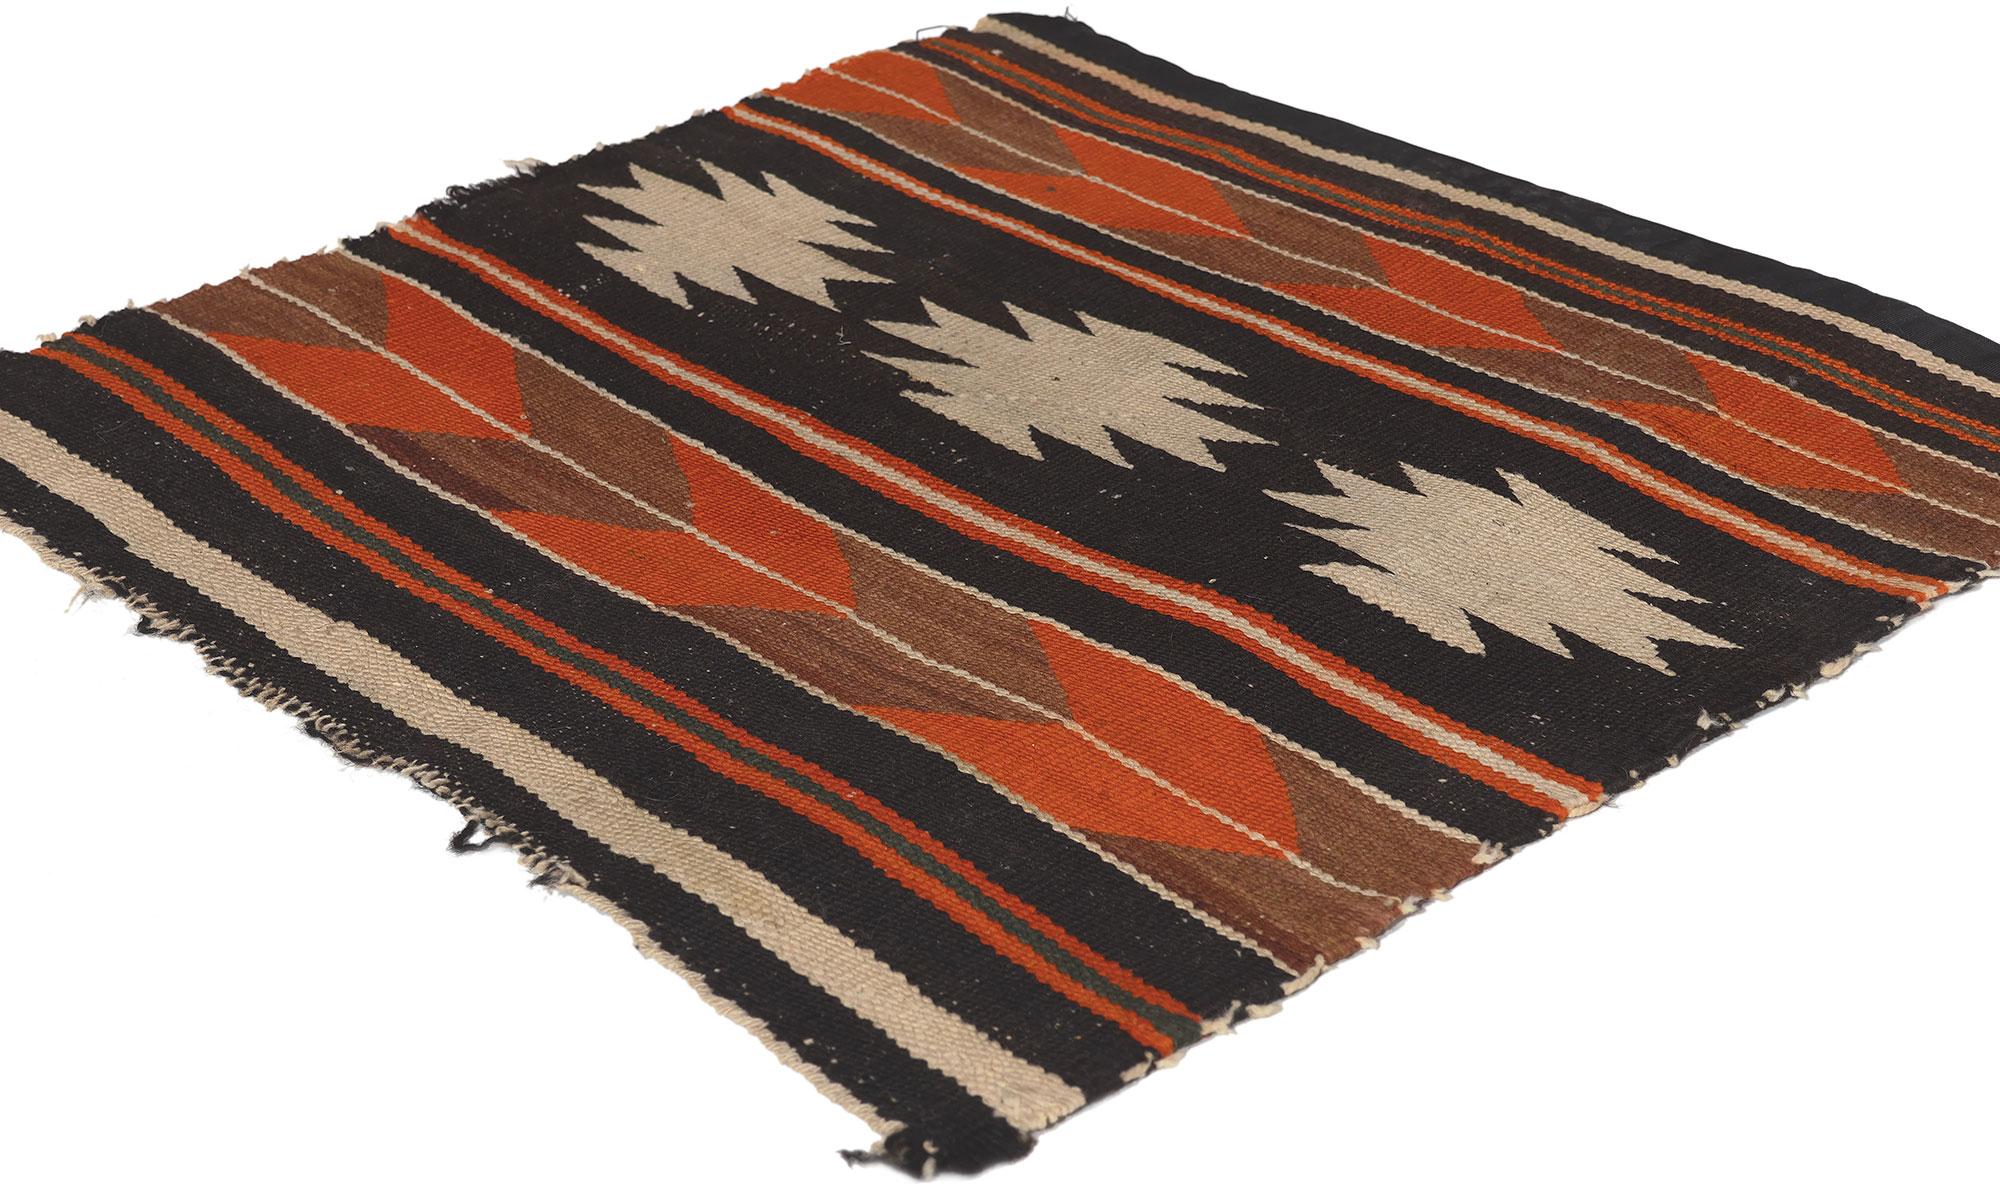 78629 Antique Chinle Navajo Rug, 01'11 x 01'11.
Southwestern chic meets luxury lodge in this handwoven Native American Navajo rug. The eye-catching Chinle design and earthy colorway woven into this piece work together creating a modern desert or